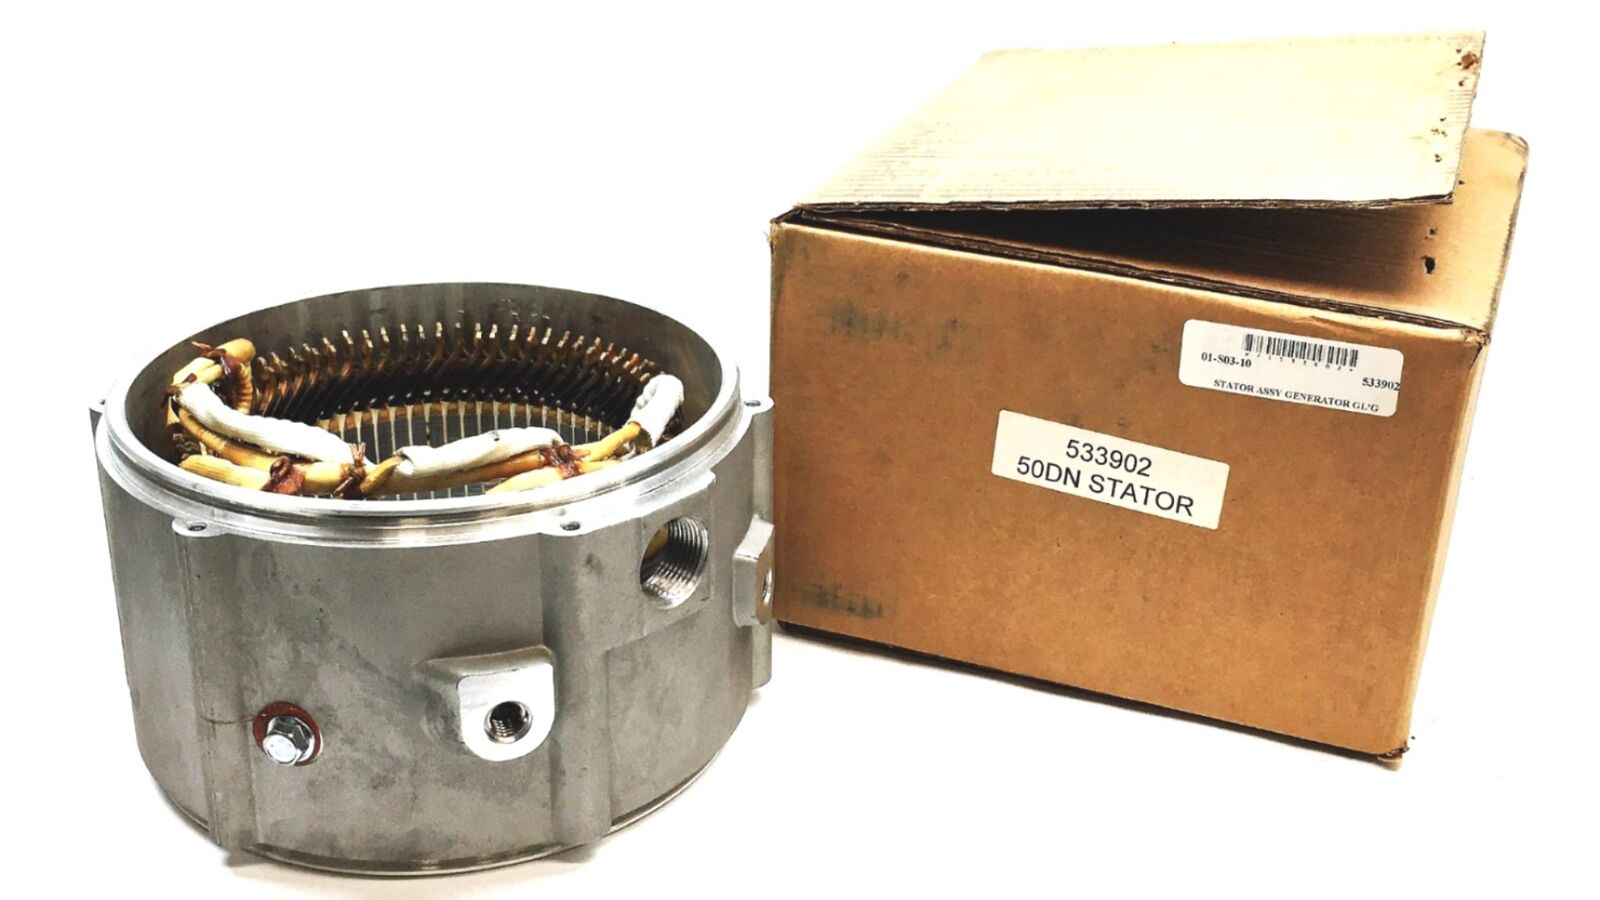 Delco Remy 50 DN Stator Generator Assembly GL'G 533902 (01-S03-10) NOS